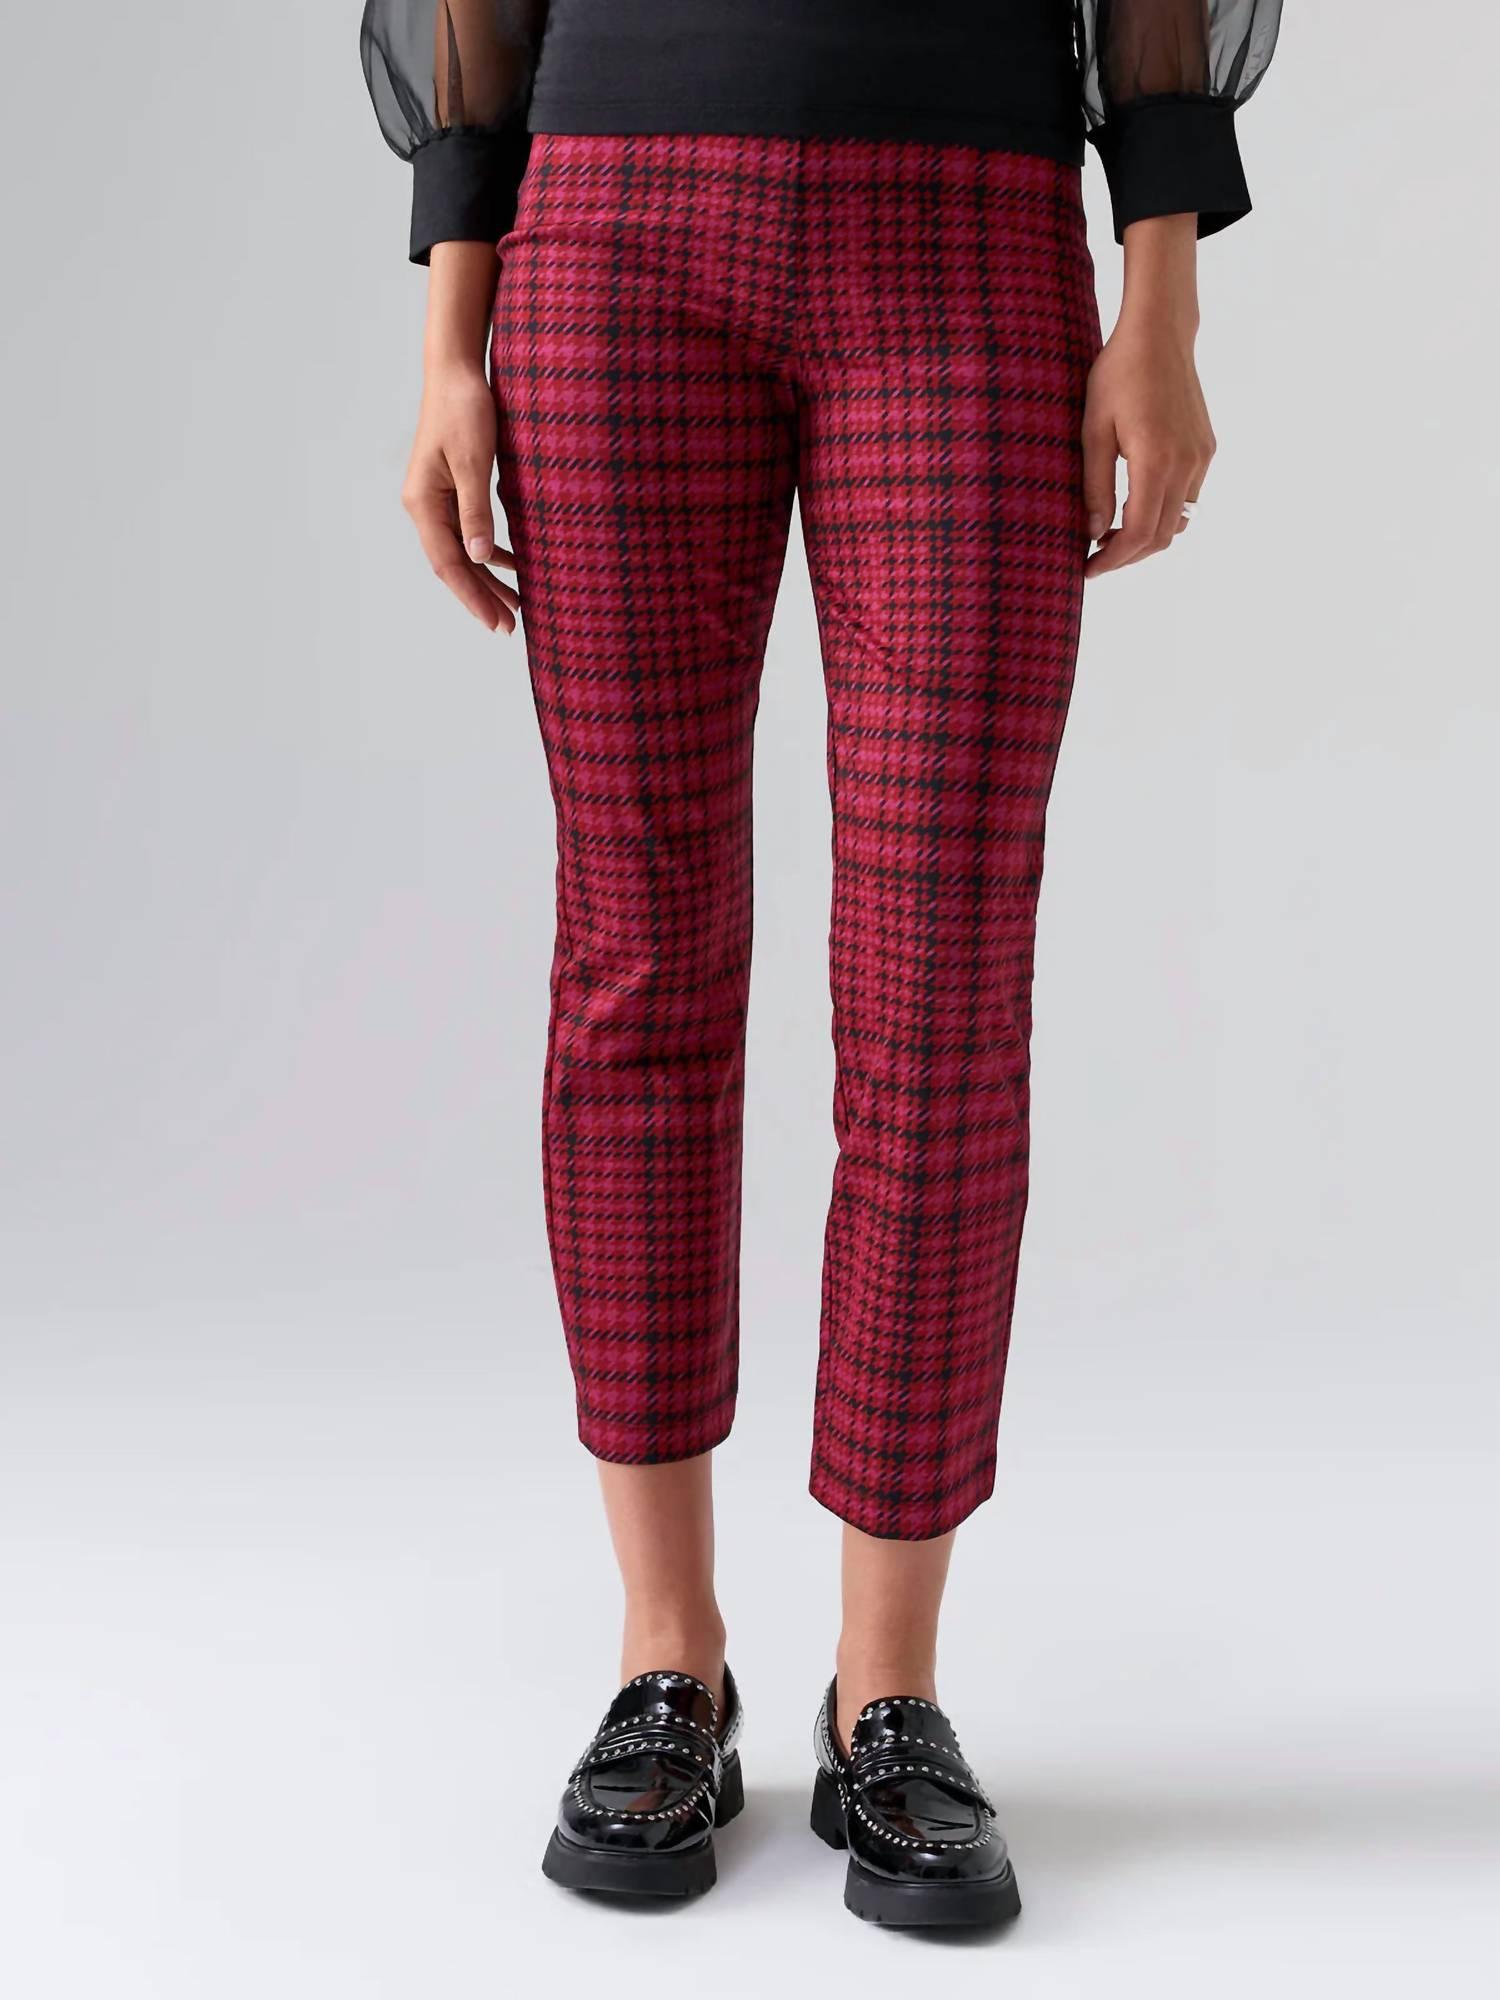 Sanctuary Carnaby Leggings In Pink Glen Plaid in Red